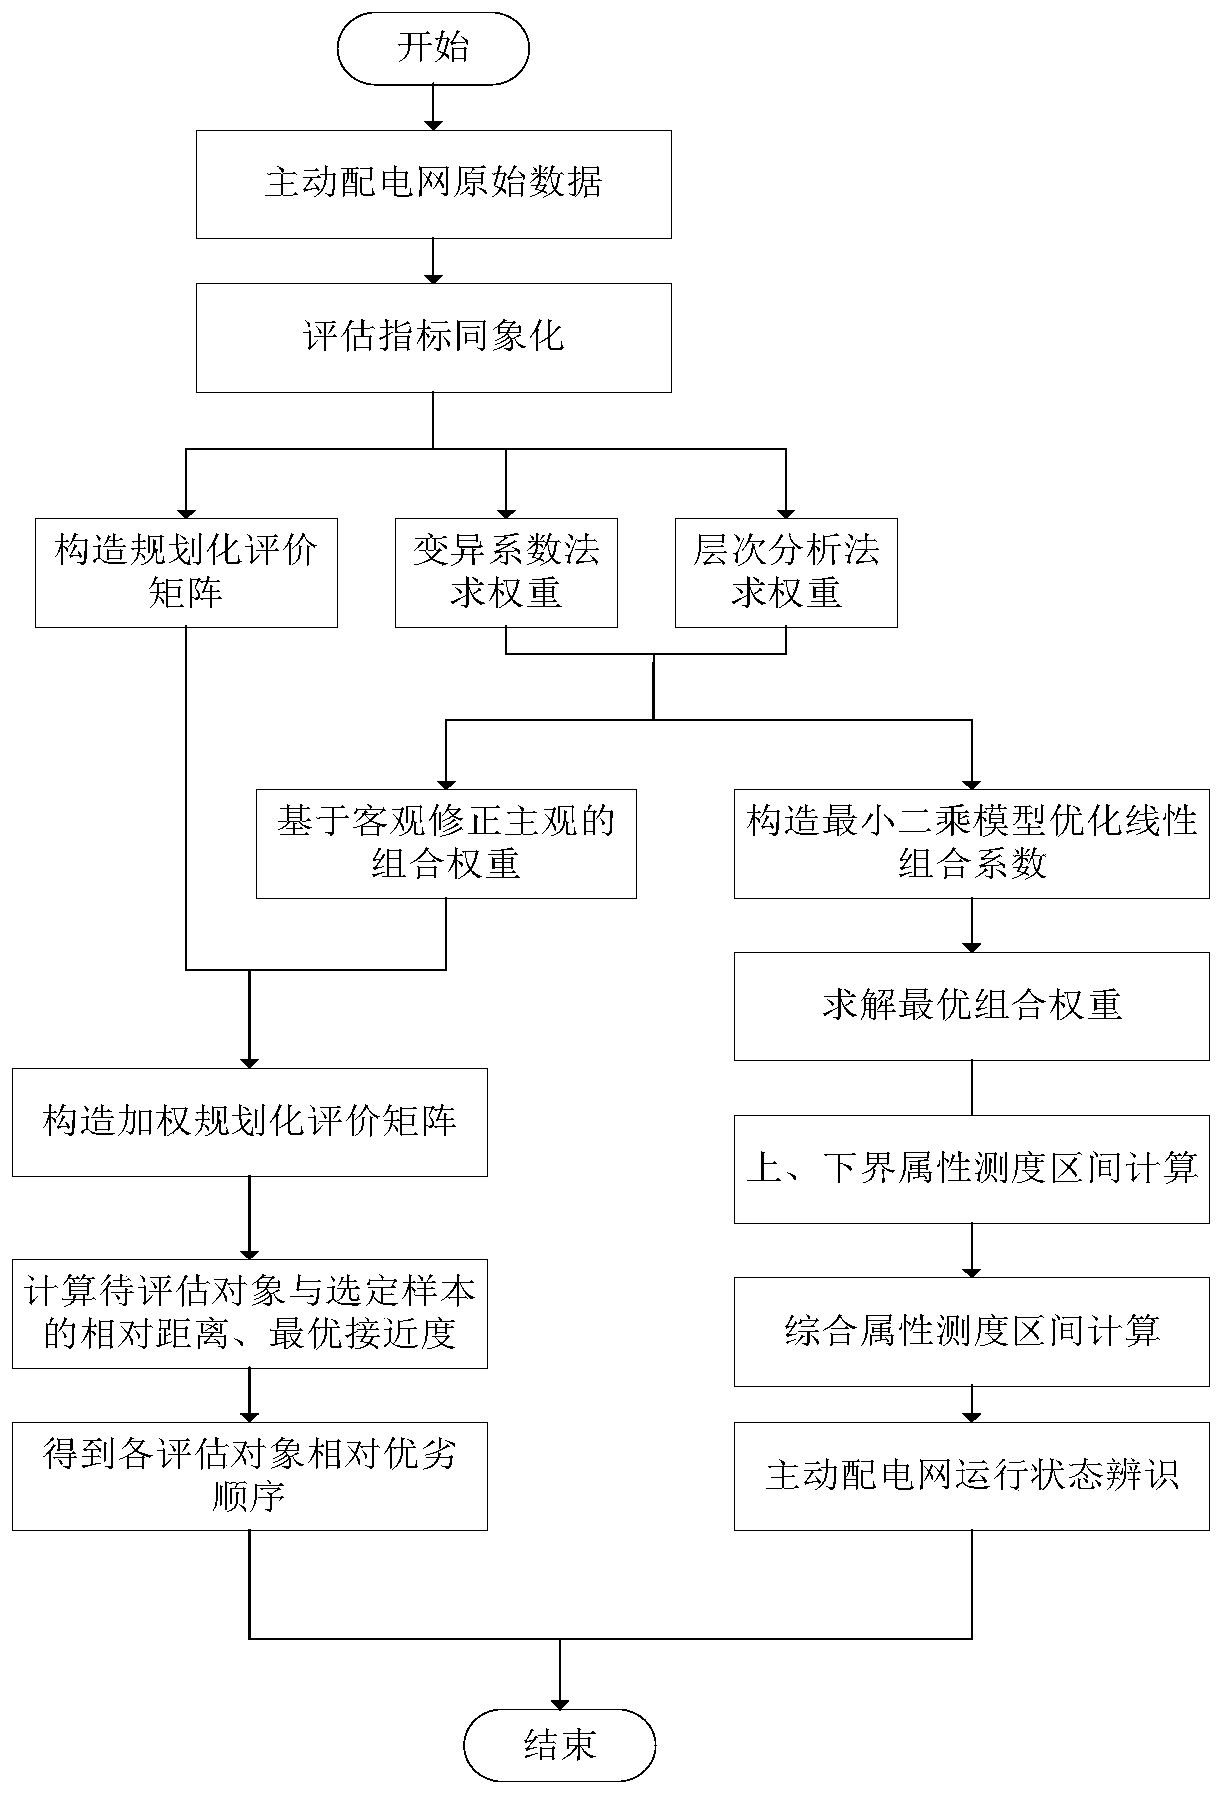 Active power distribution network operation state evaluation method